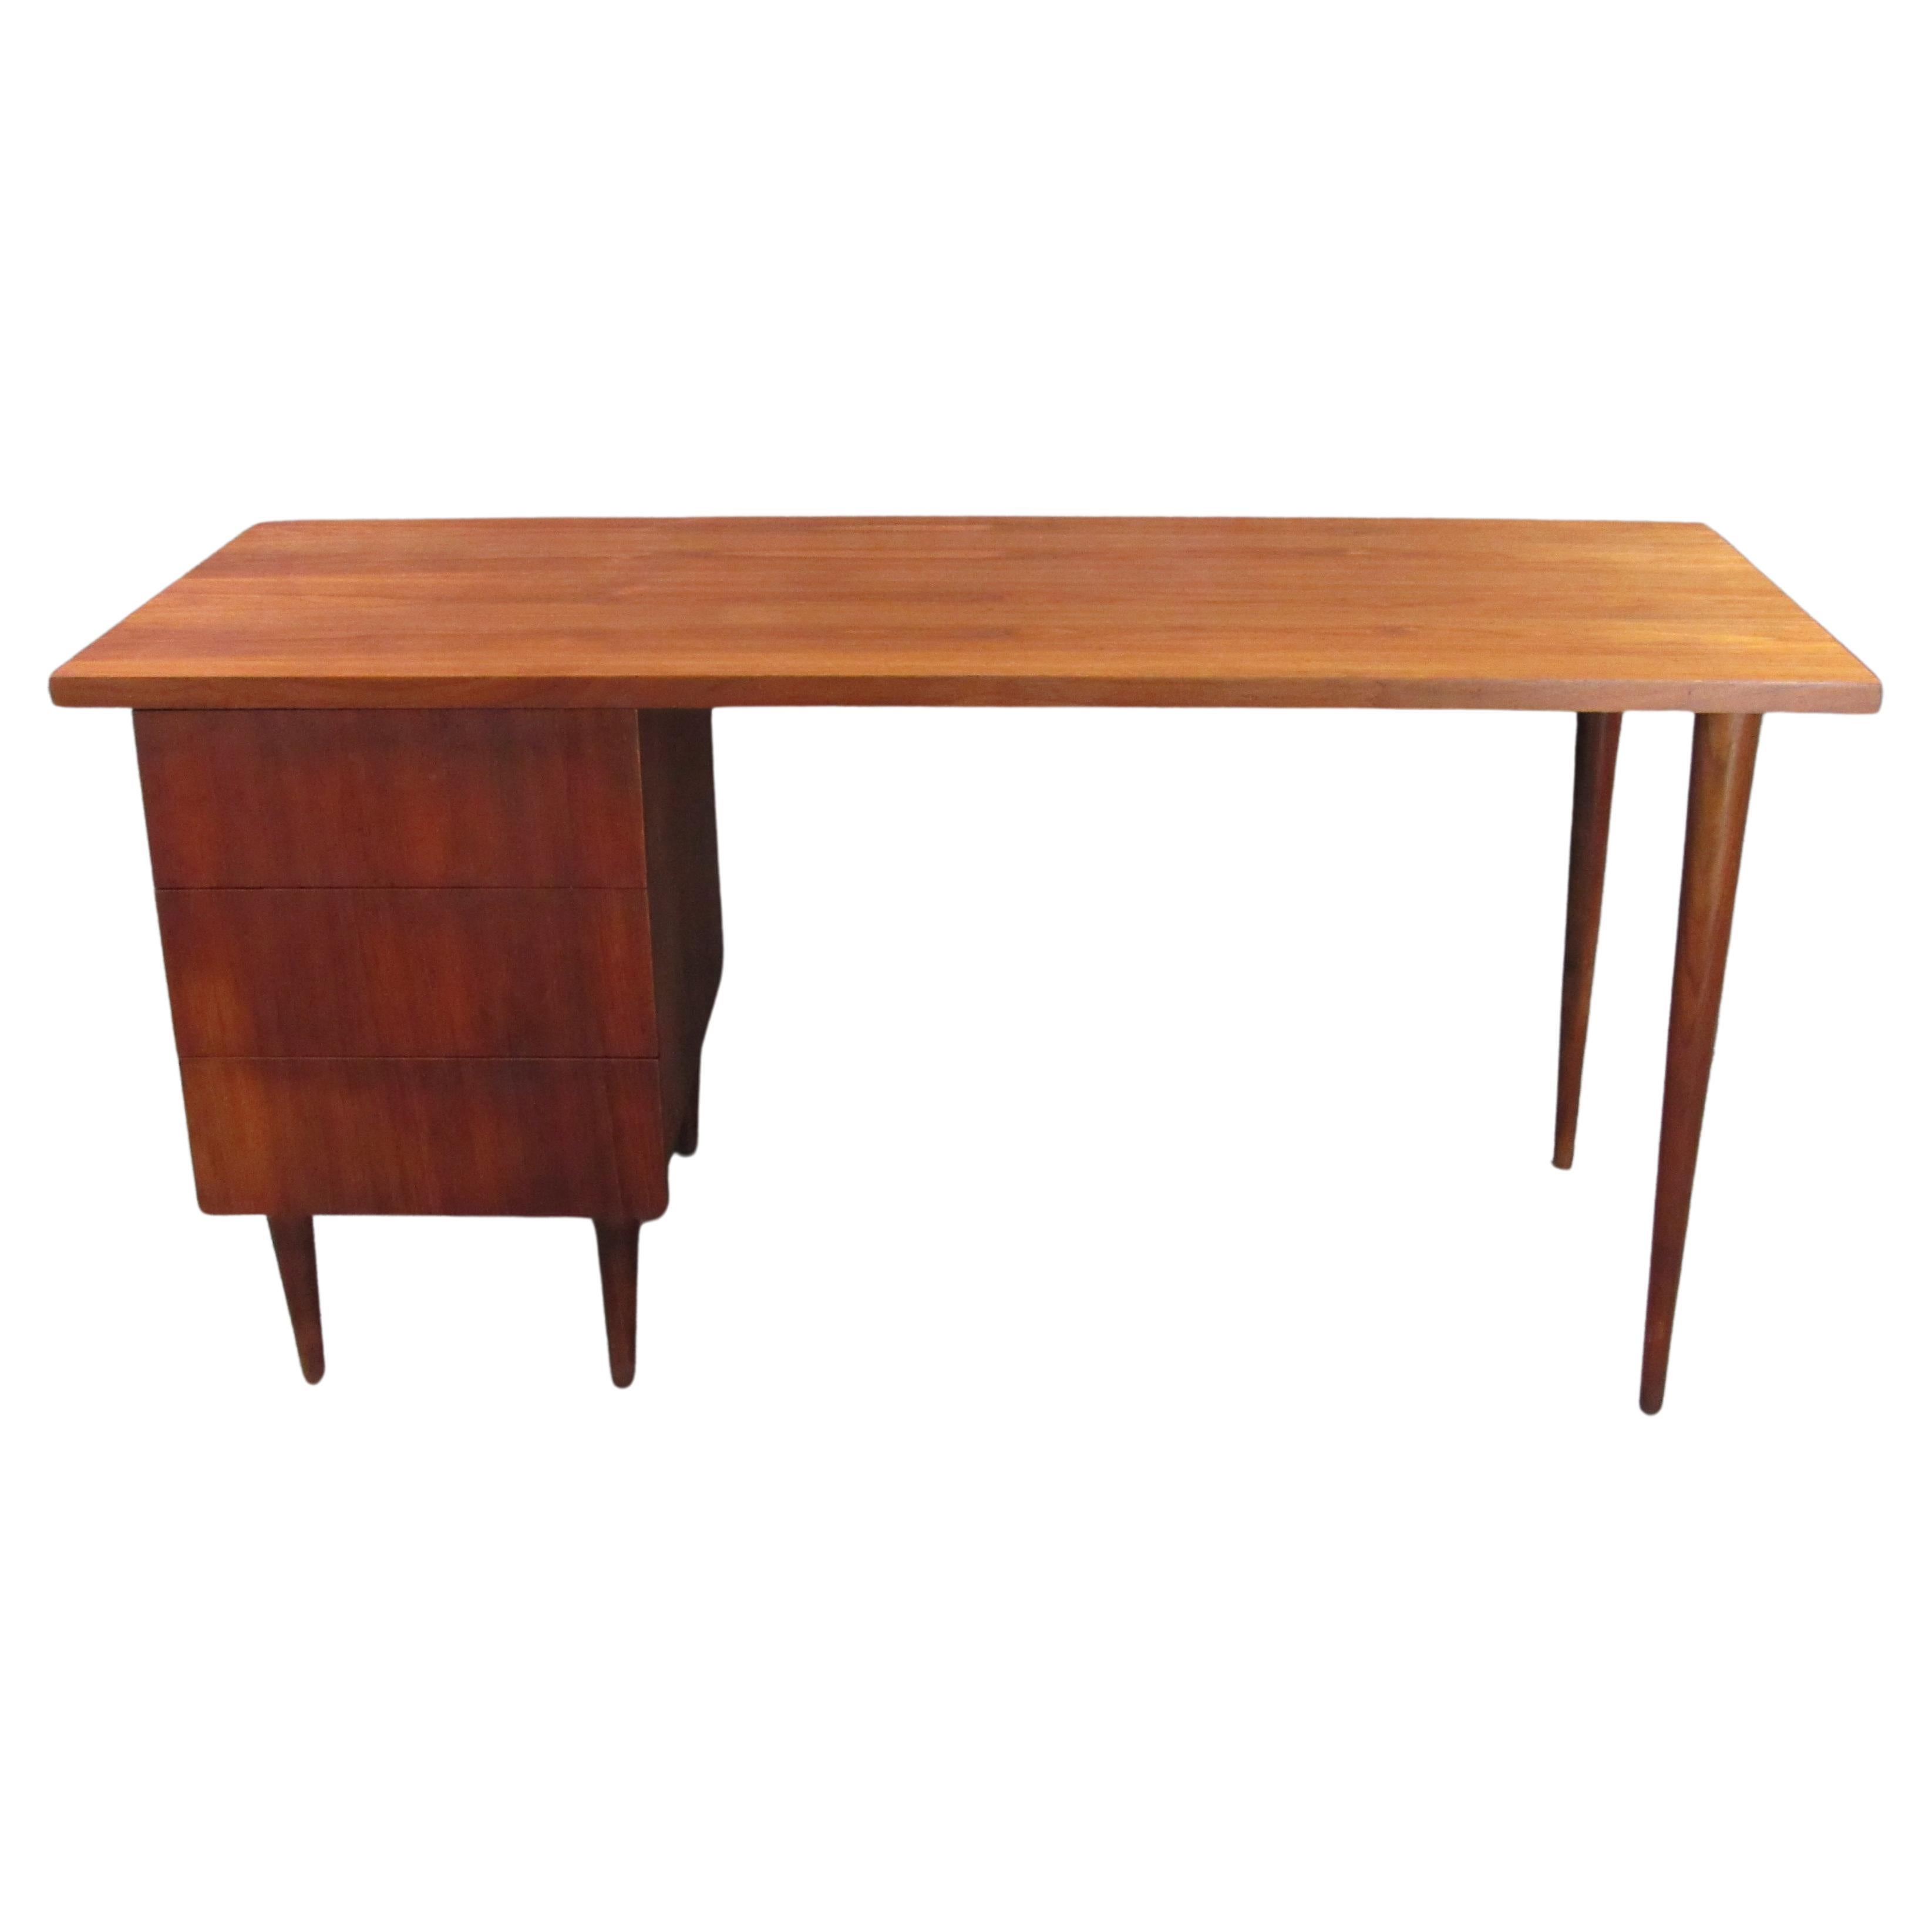 Mid-Century Modern Walnut Small Desk by Ben Thompson for Design Research